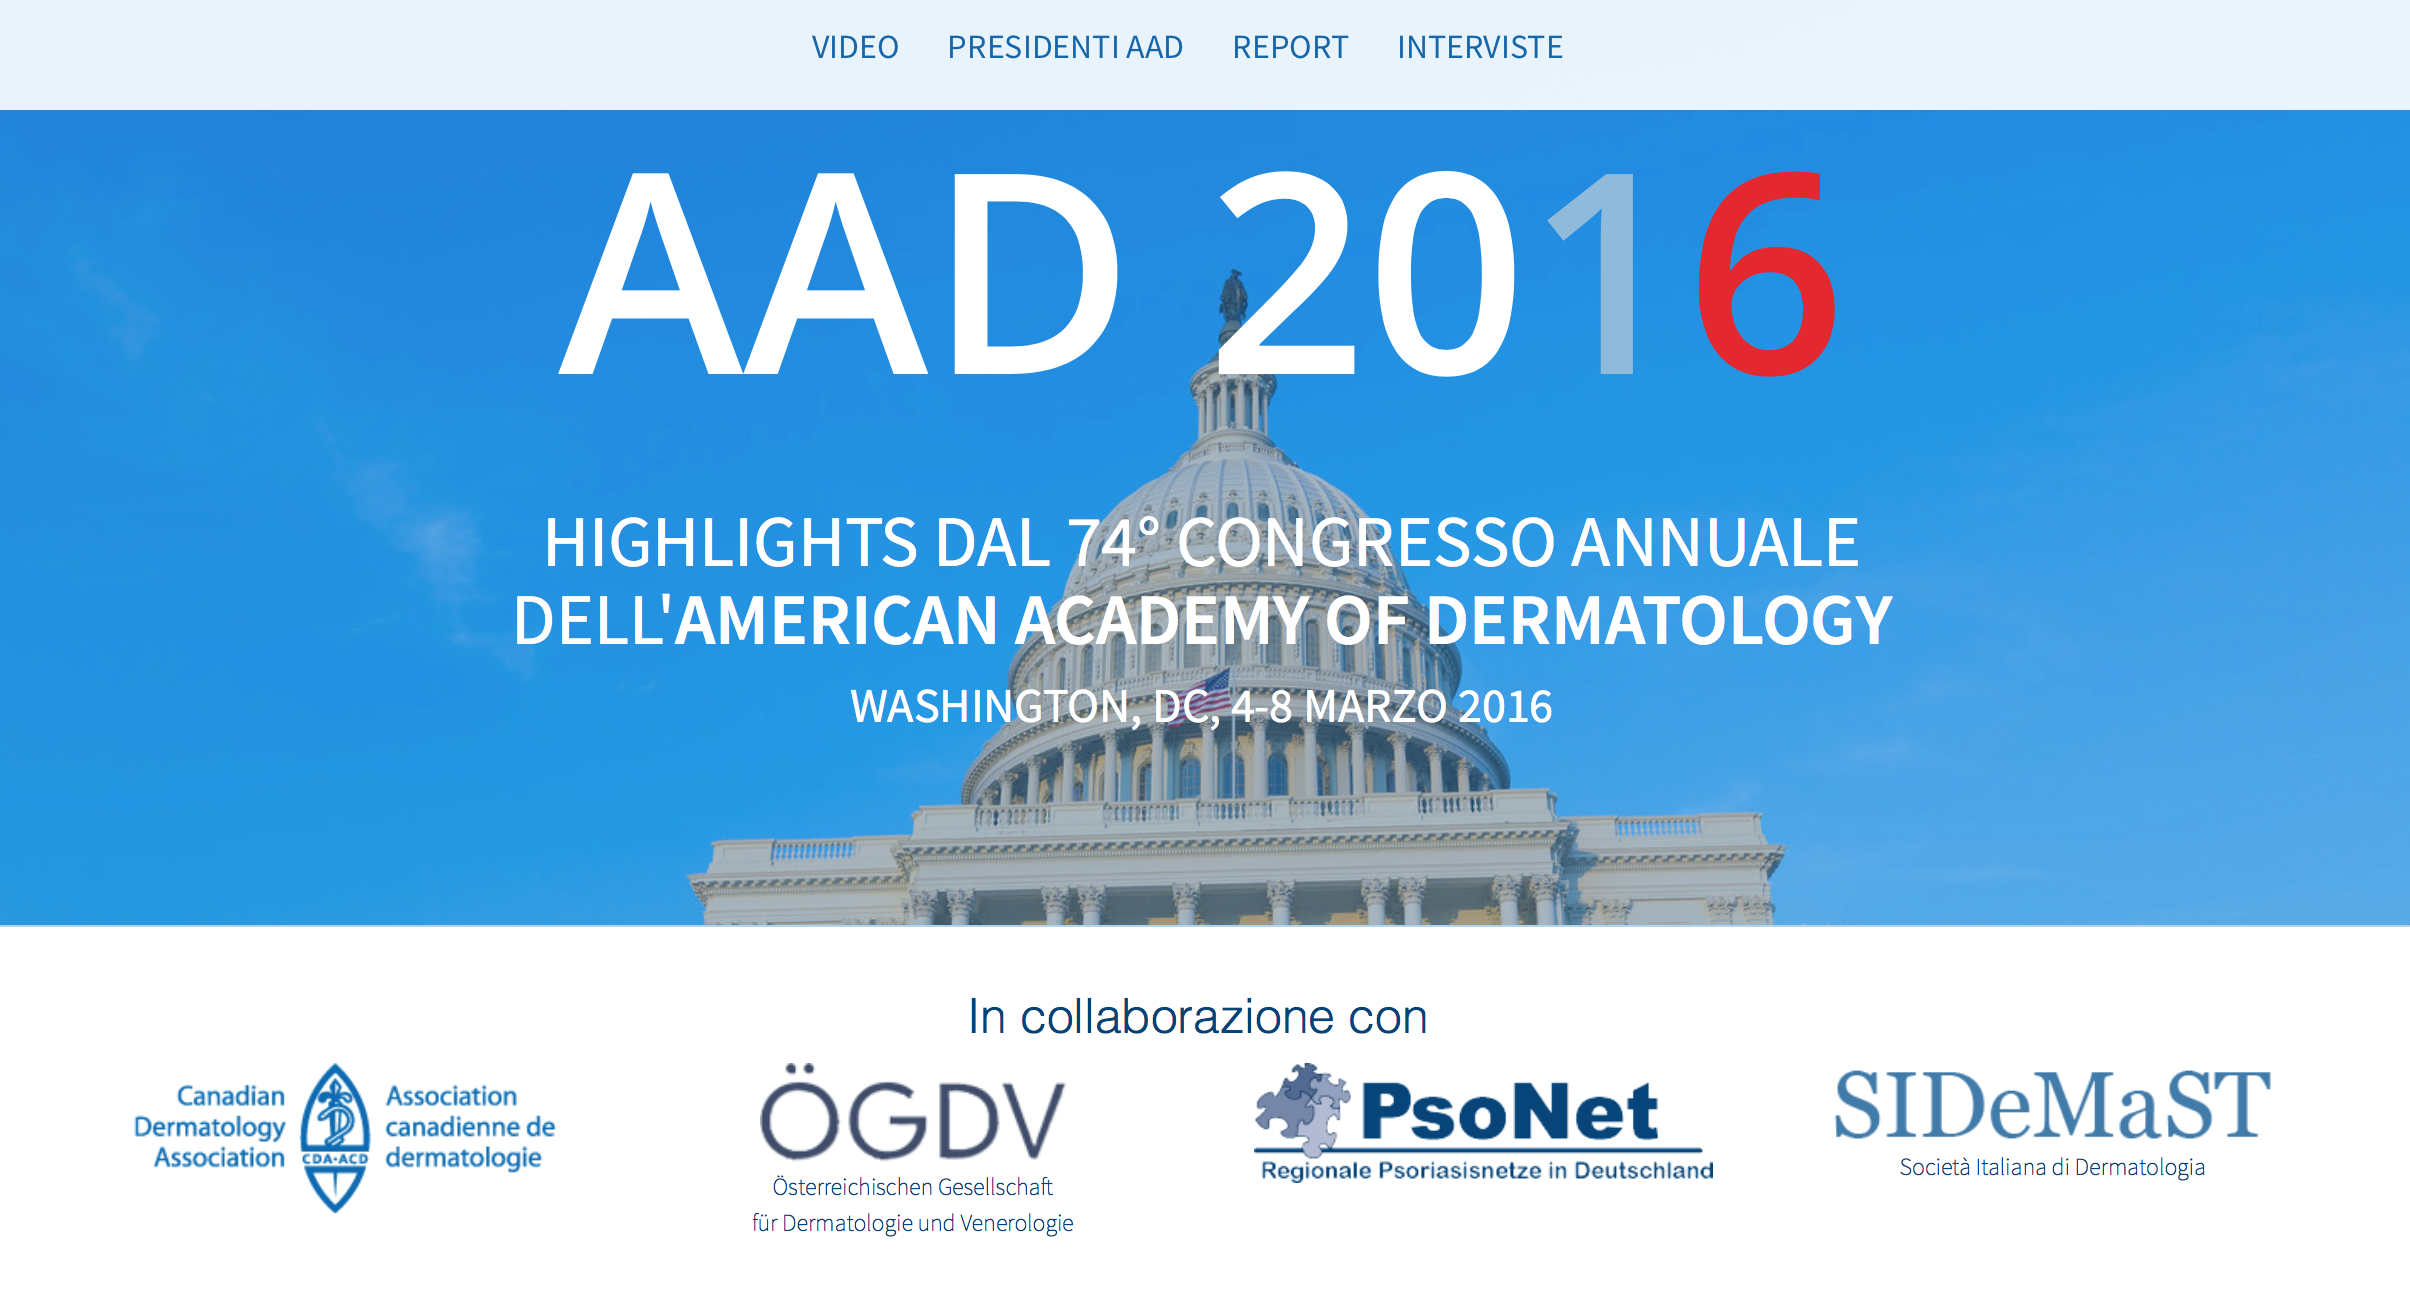 Highlights dal 74° Congresso Annuale dell'American Academy of Dermatology